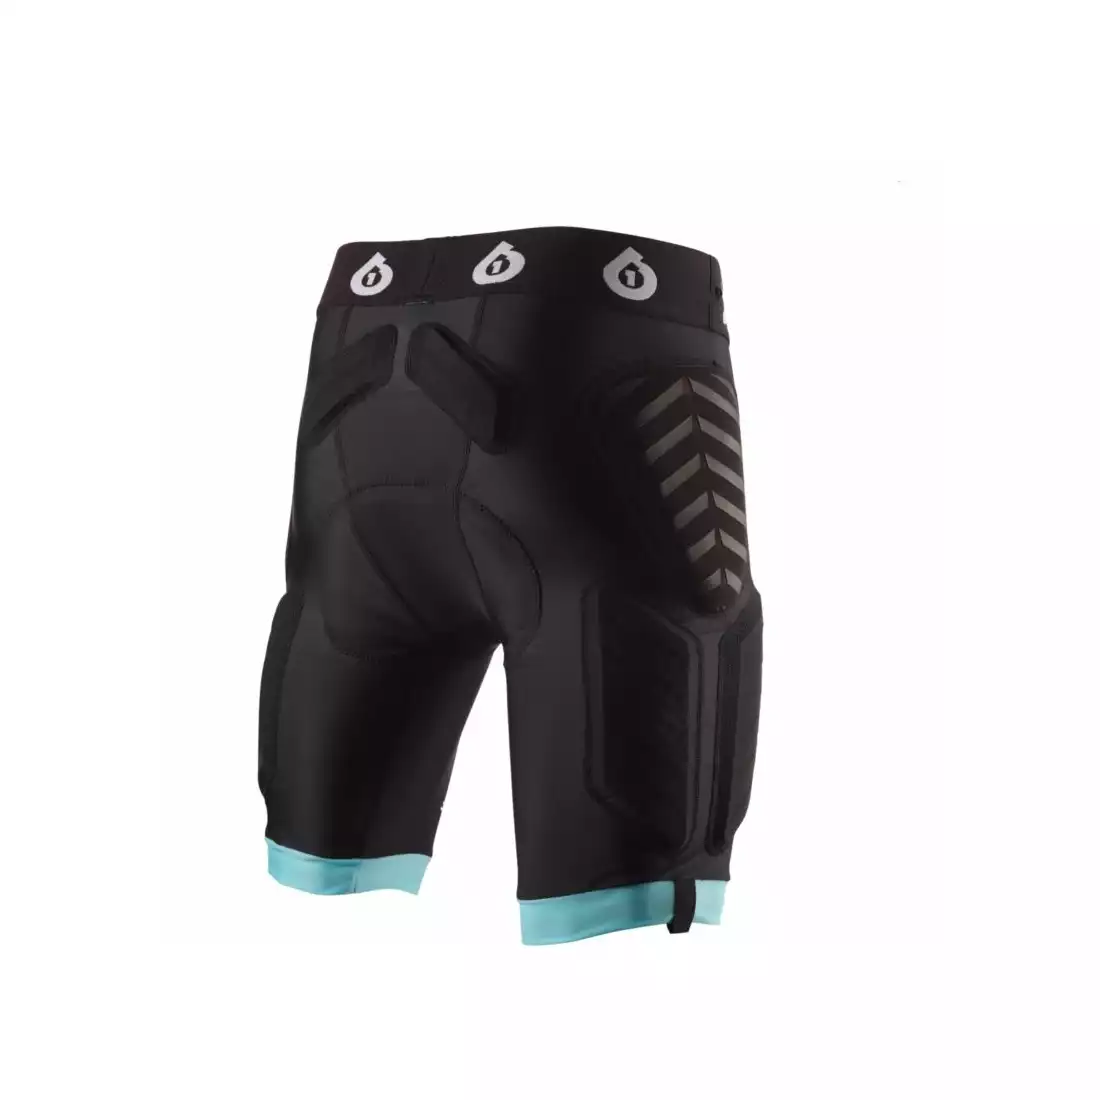 661 EVO COMPRESSION WOMENS Women's cycling shorts with hip protection, black and turquoise